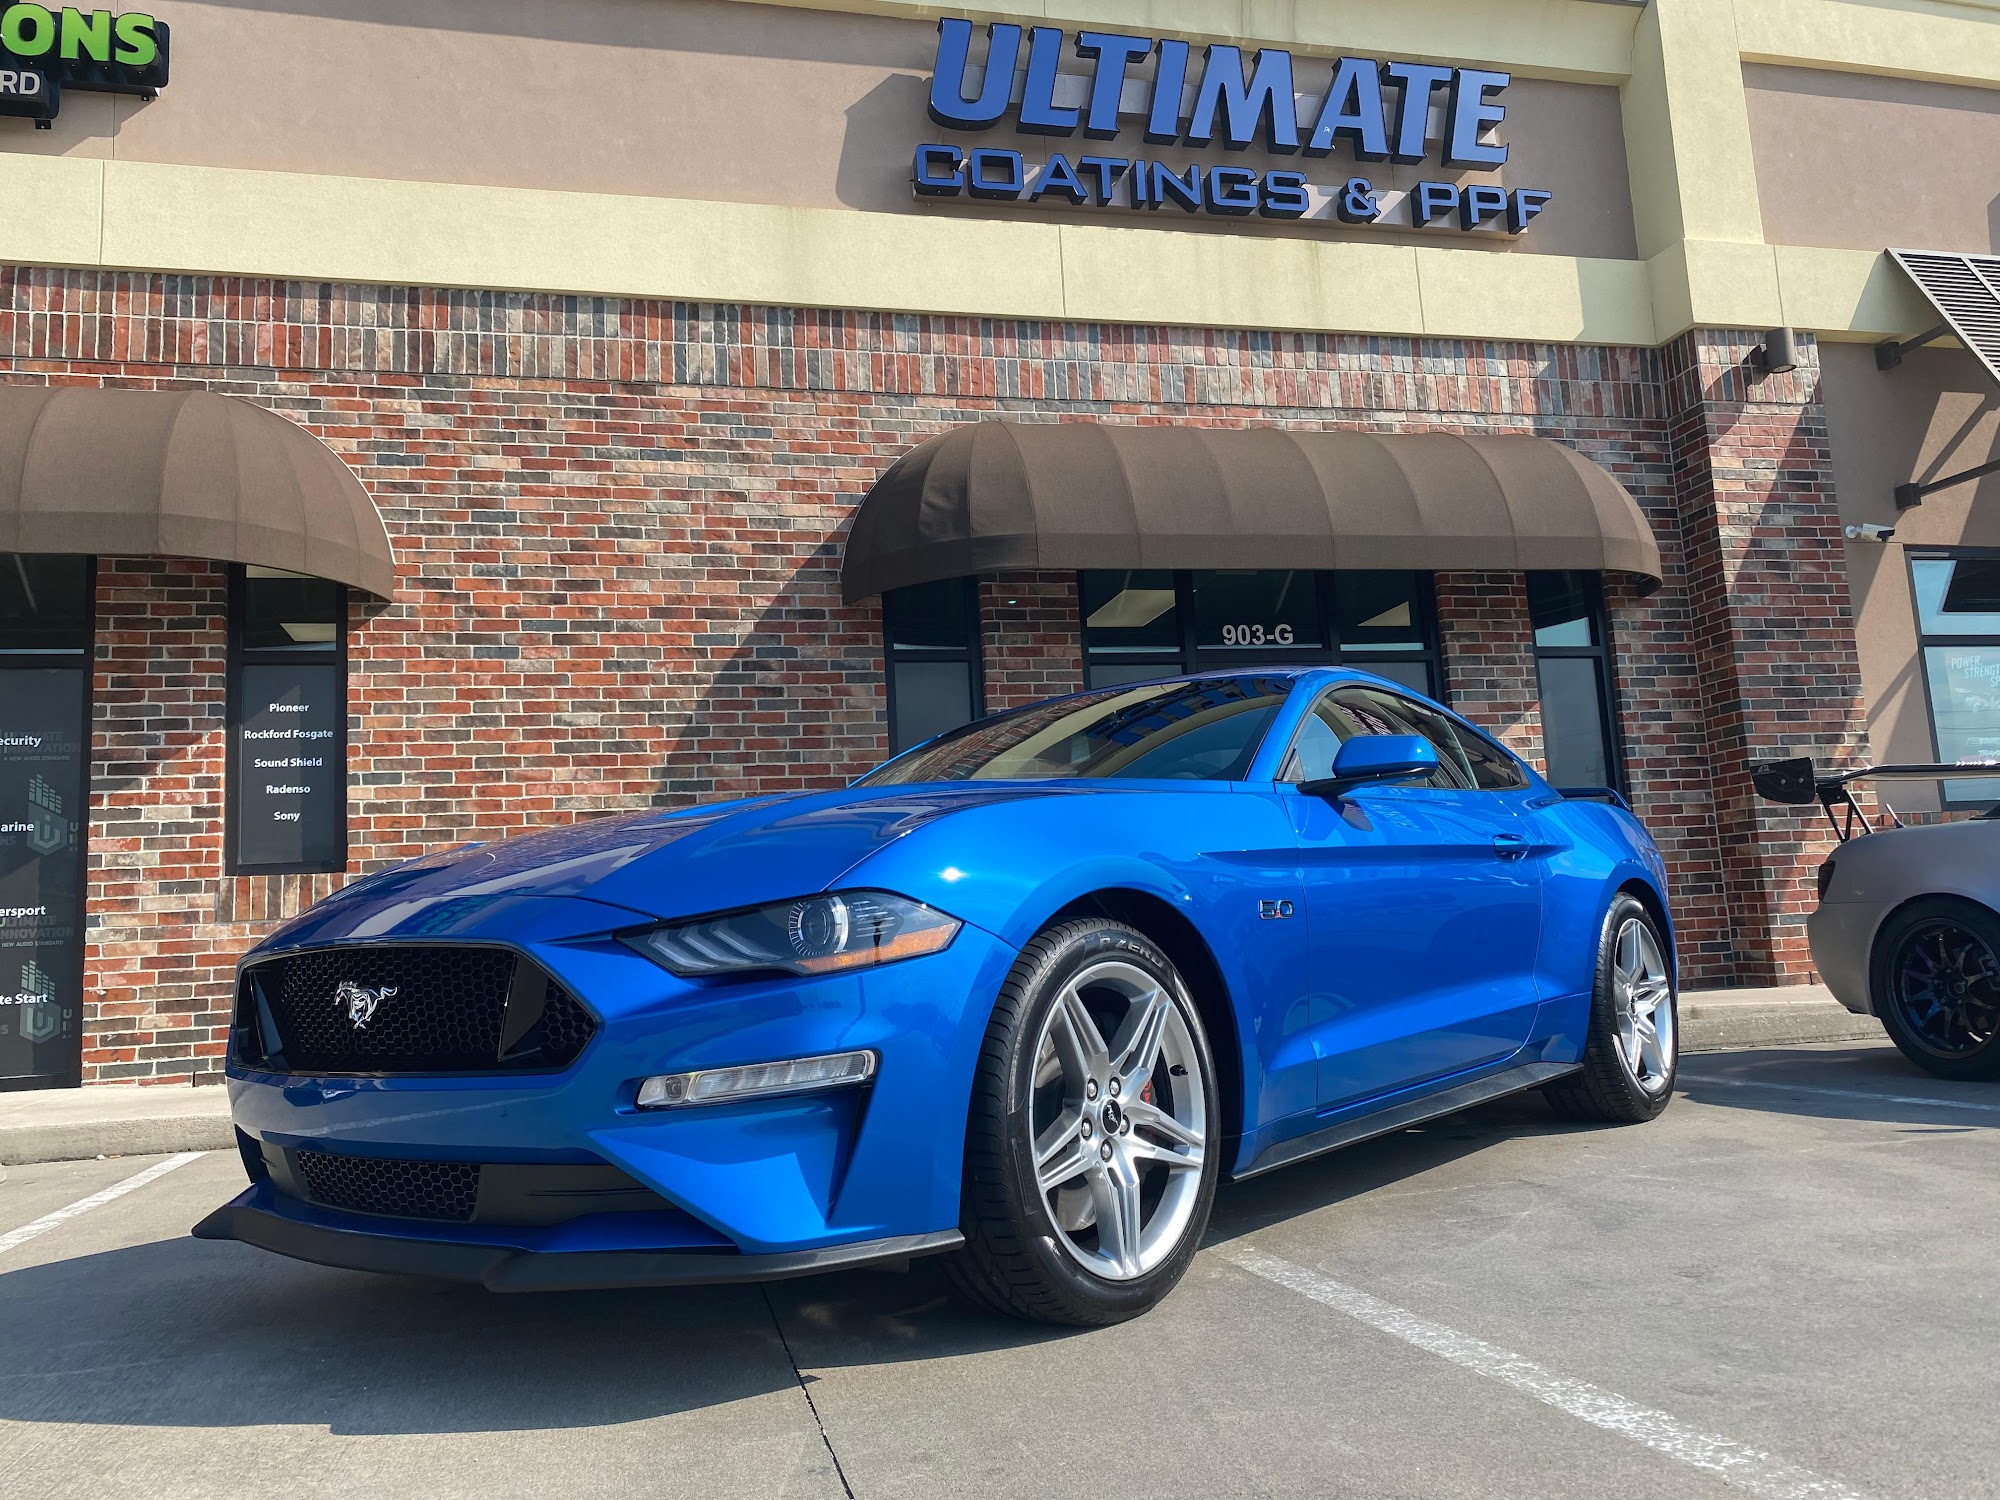 Ultimate Ceramic Coatings and PPF 903 FM Road 518 East Suite G, Kemah Texas 77565